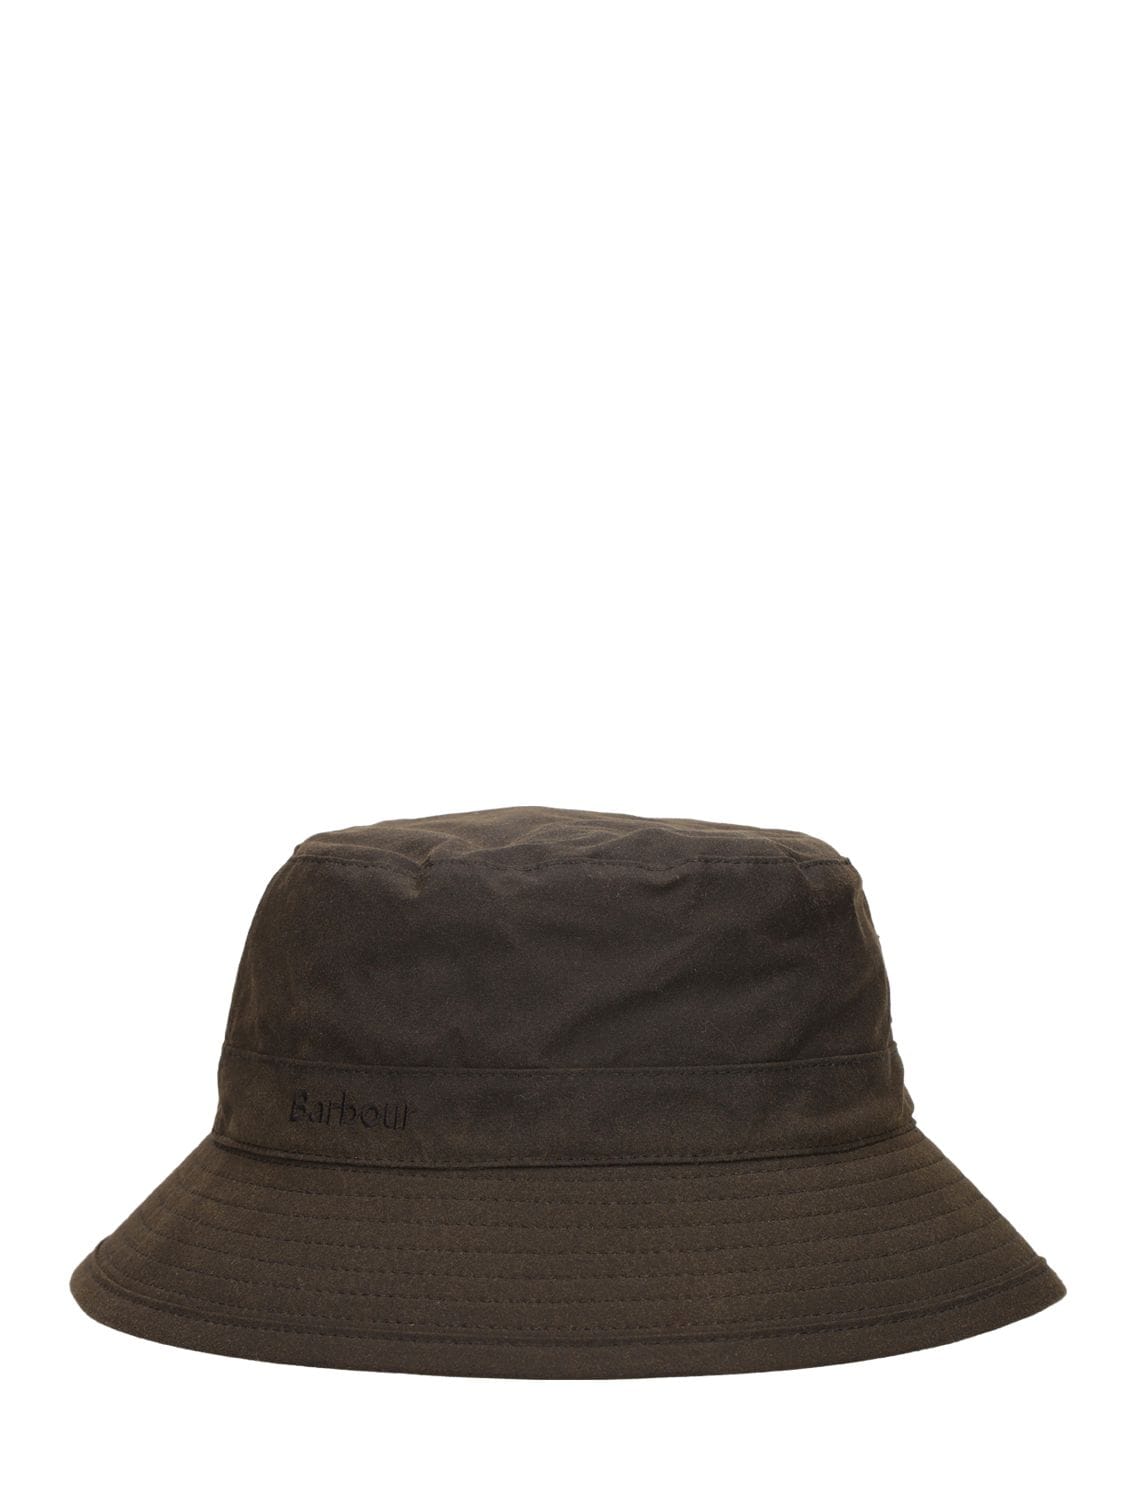 BARBOUR WAXED COTTON BUCKET HAT